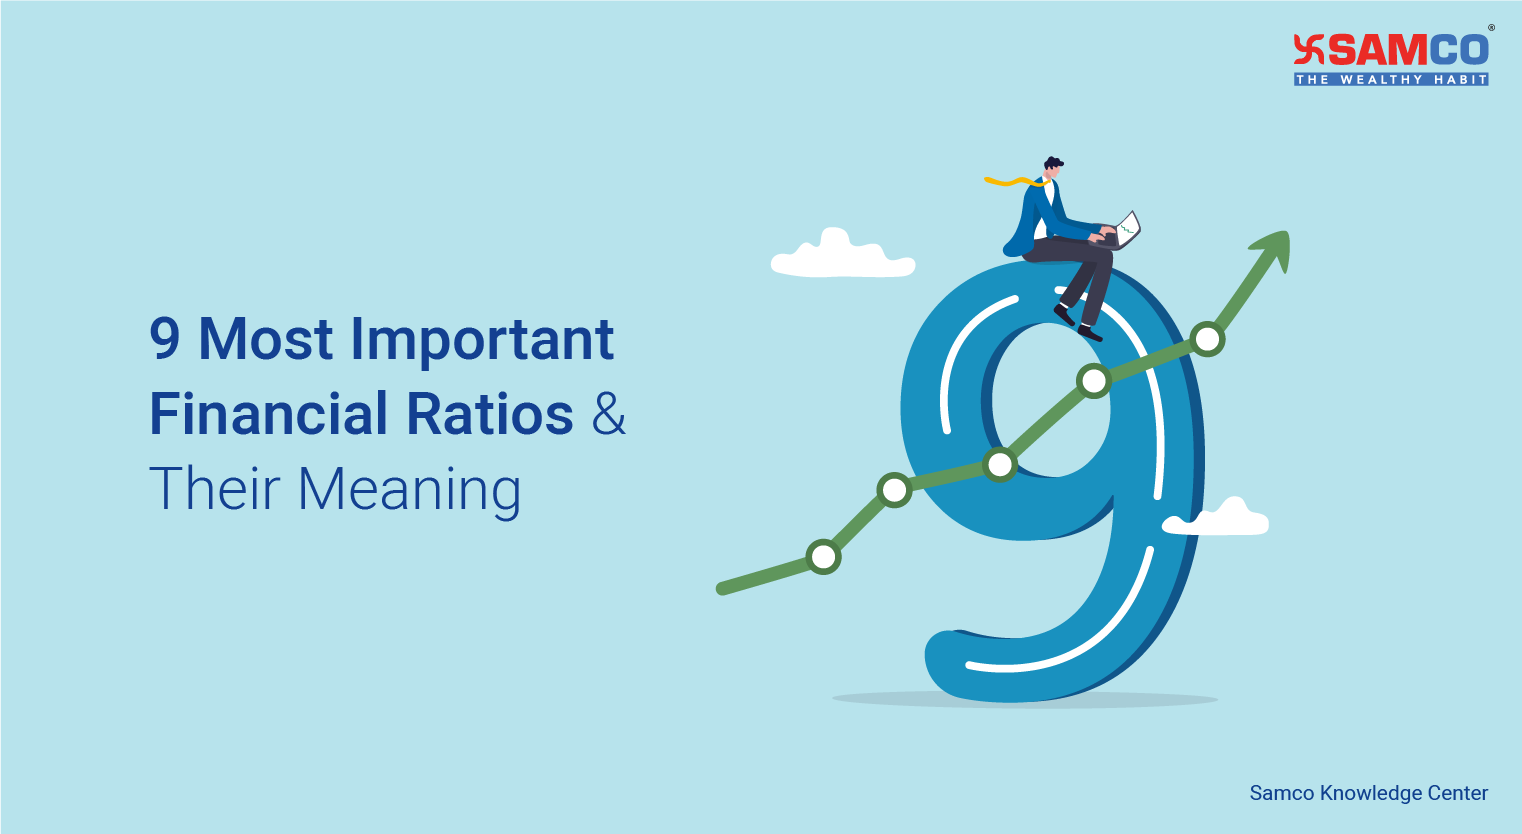  9 Most Important Financial Ratios & Their Meaning 